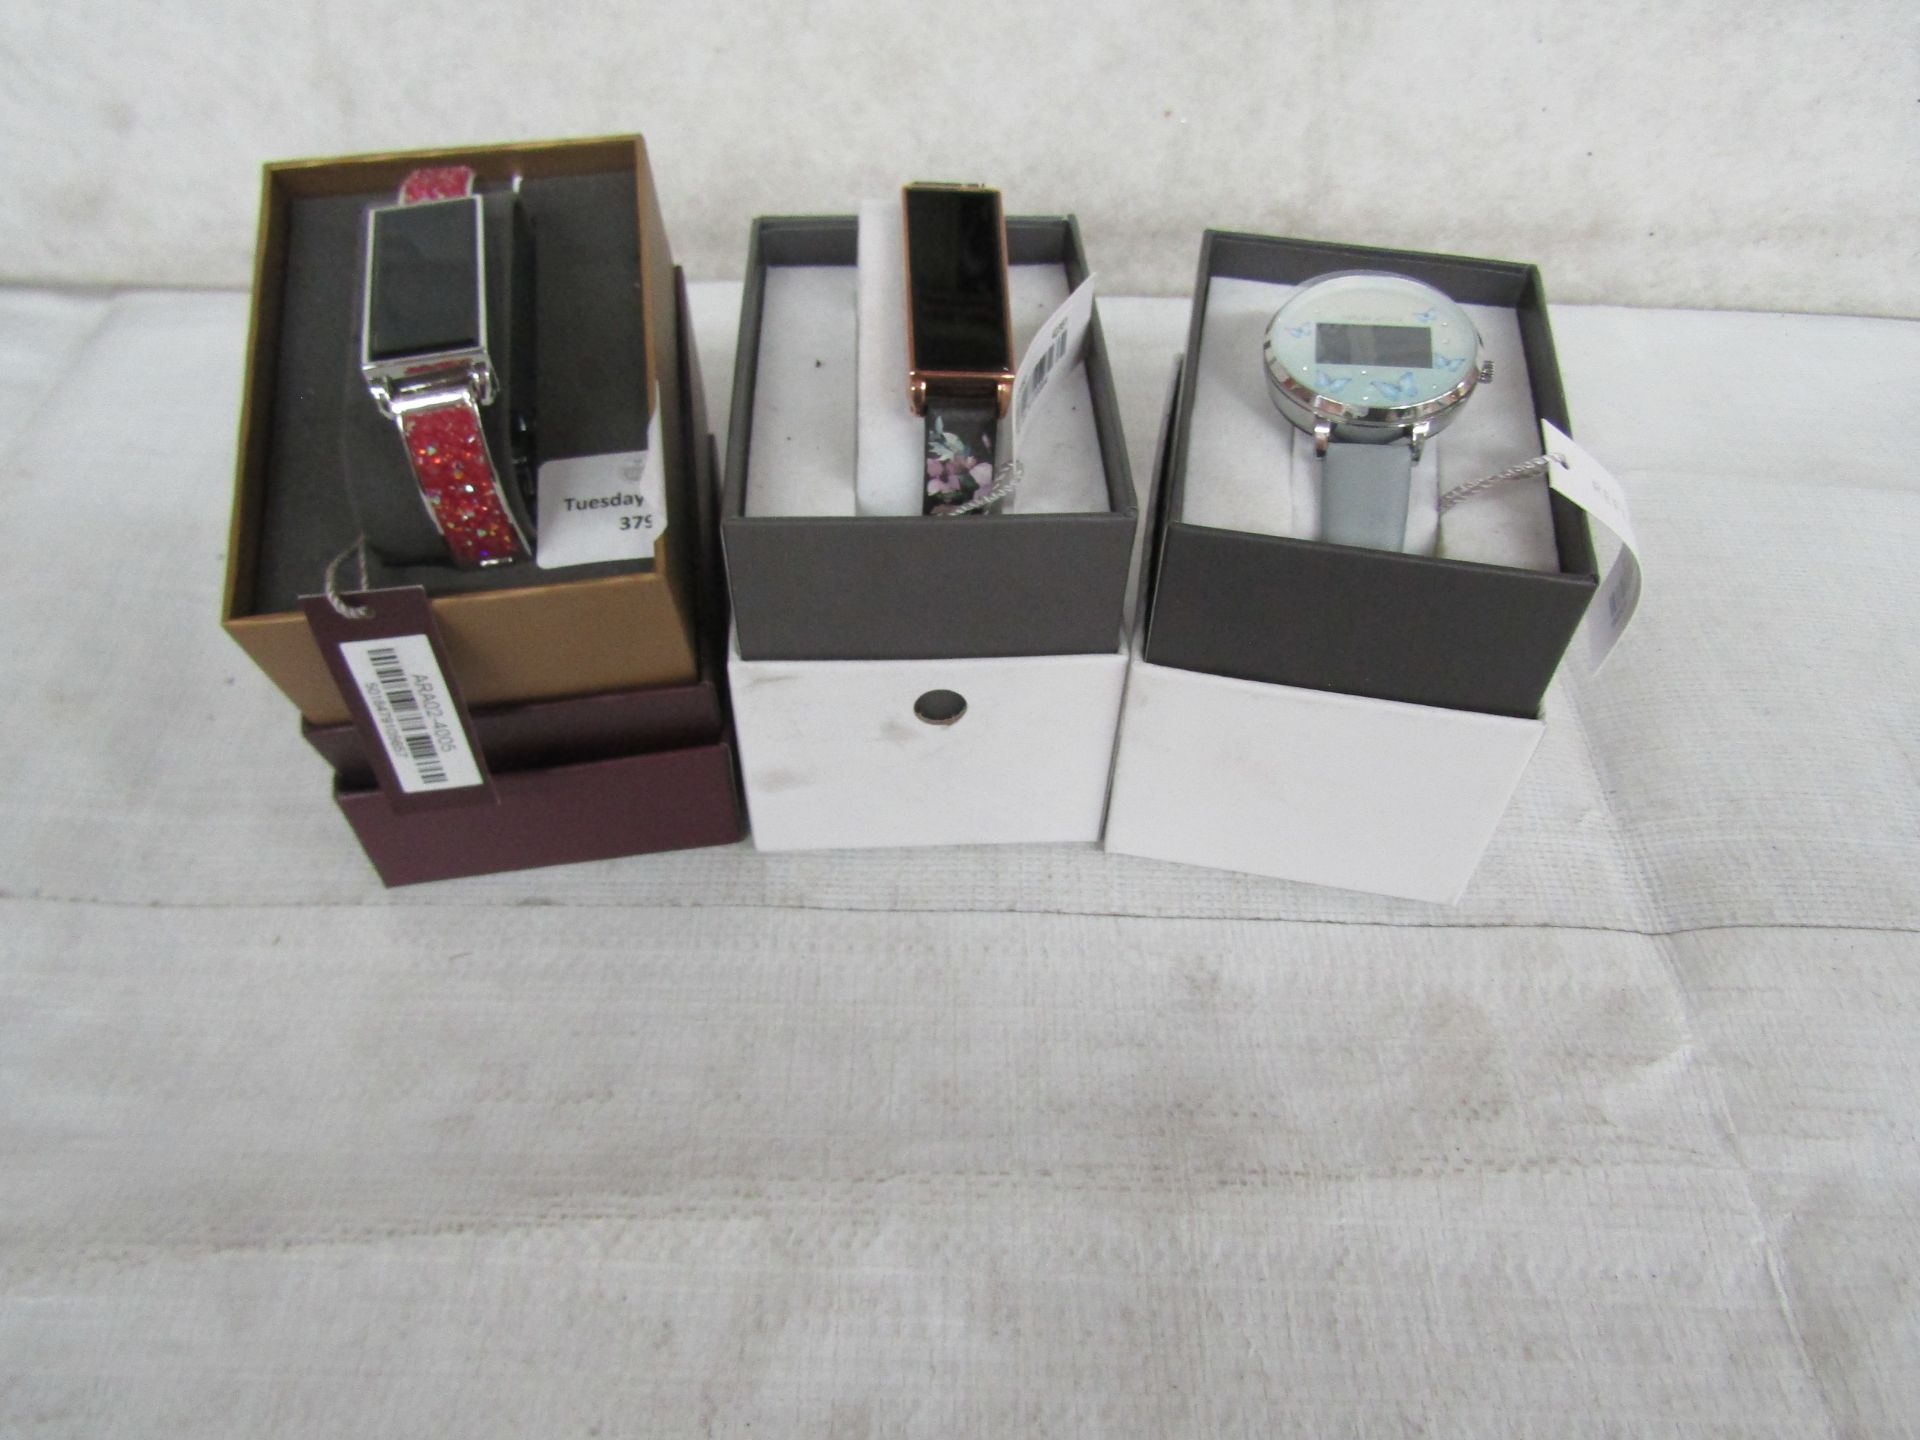 3X Various Reflex Active - Smart Watch - See Image For Designs - All Look New With Tags.